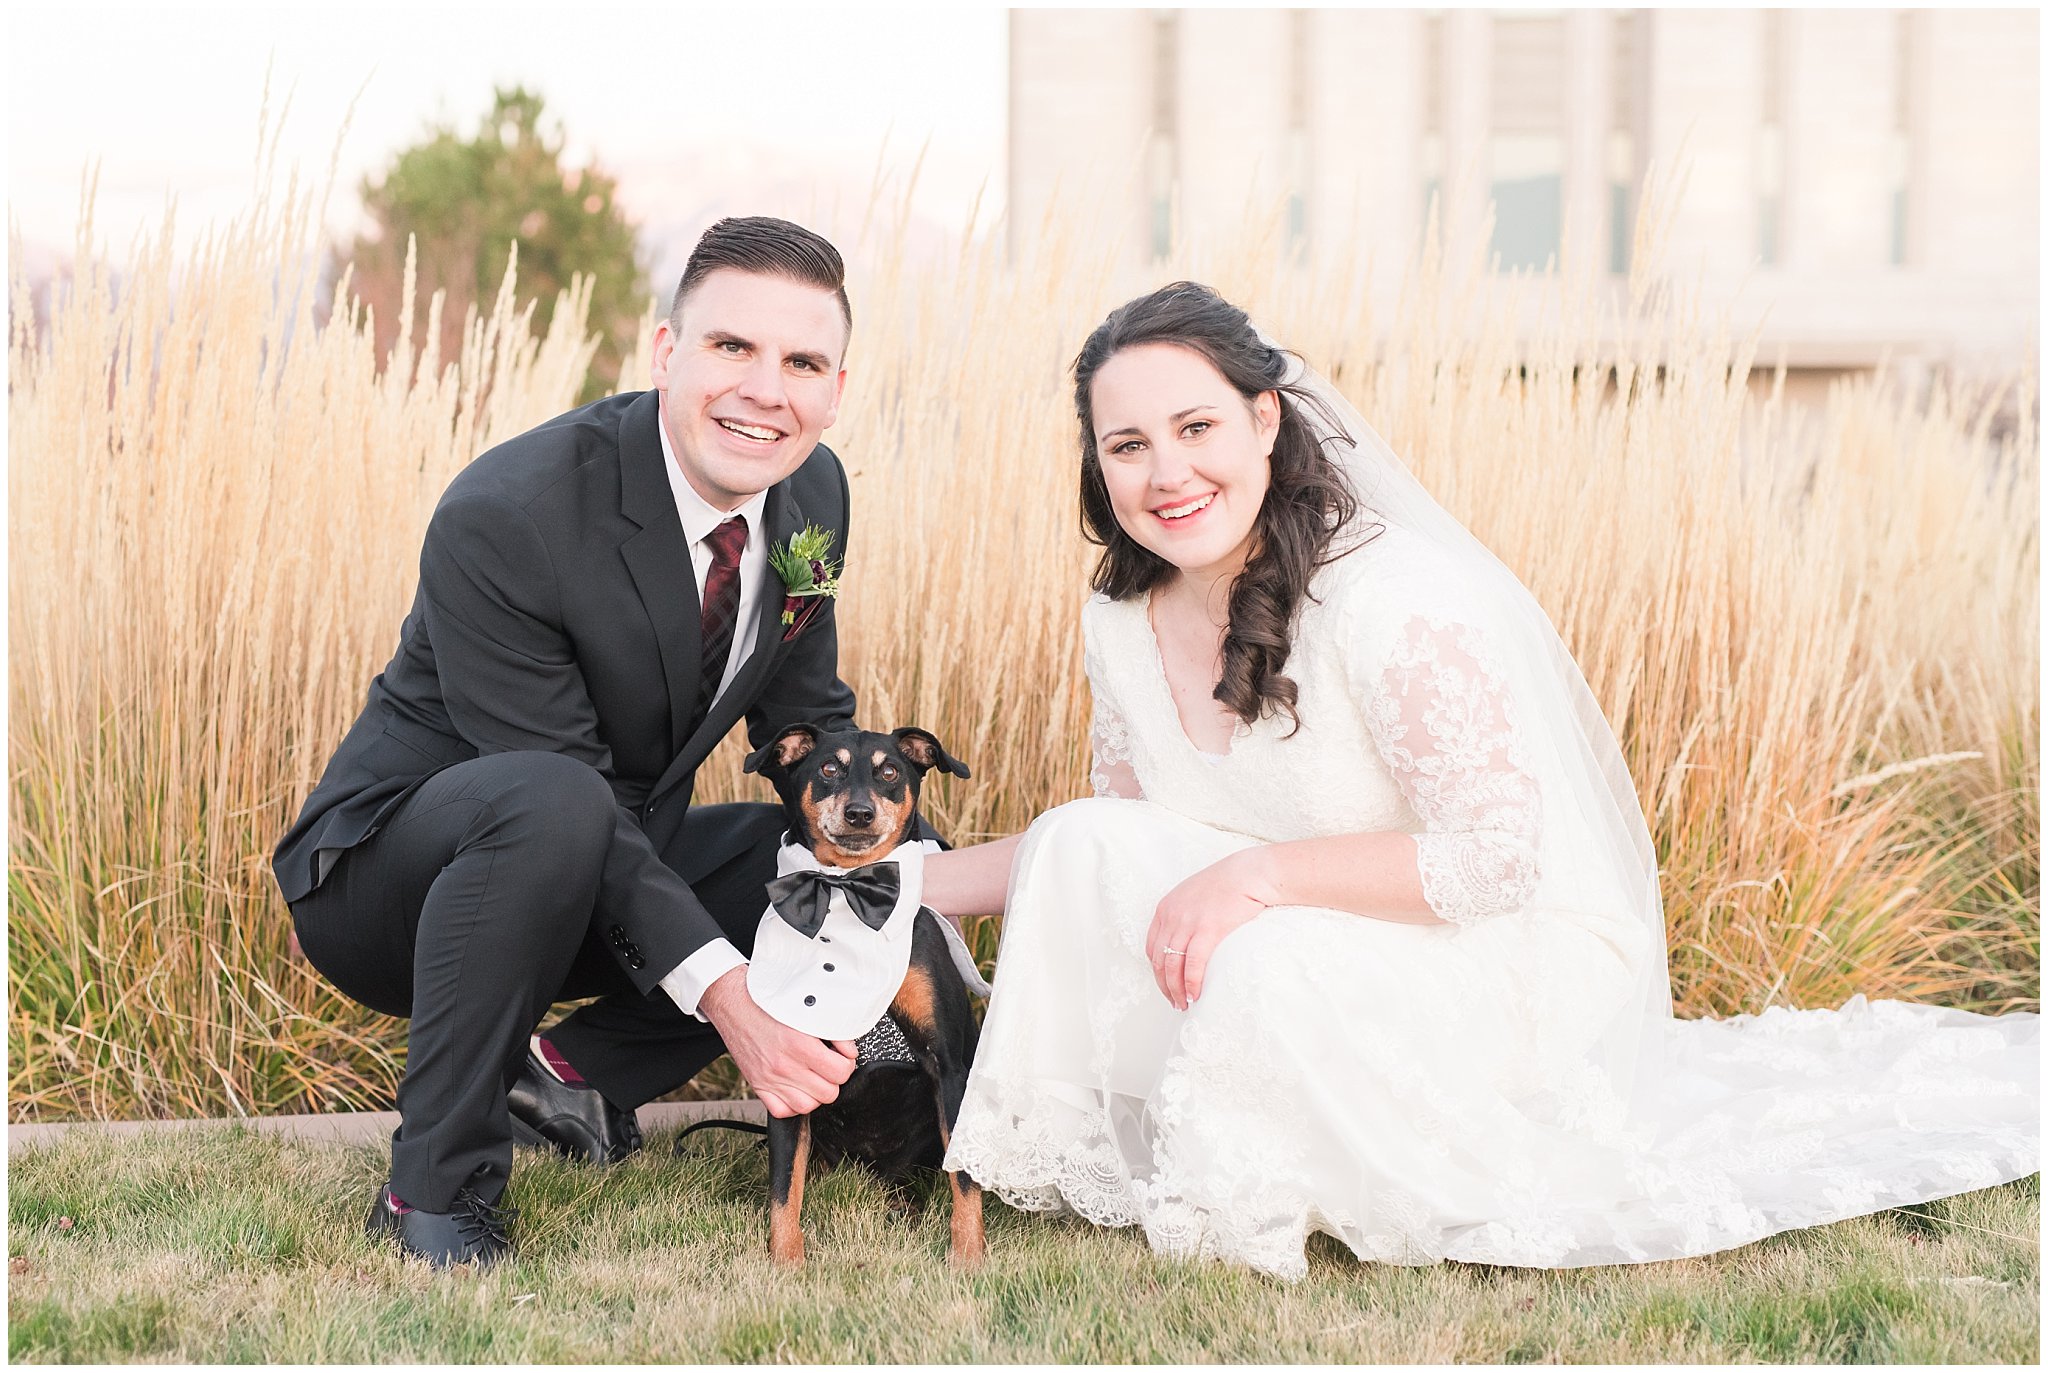 Bride surprises groom with dog at wedding and formal session | Dog first look surprise | | oquirrh mountain temple winter formal session | Jessie and Dallin Photography